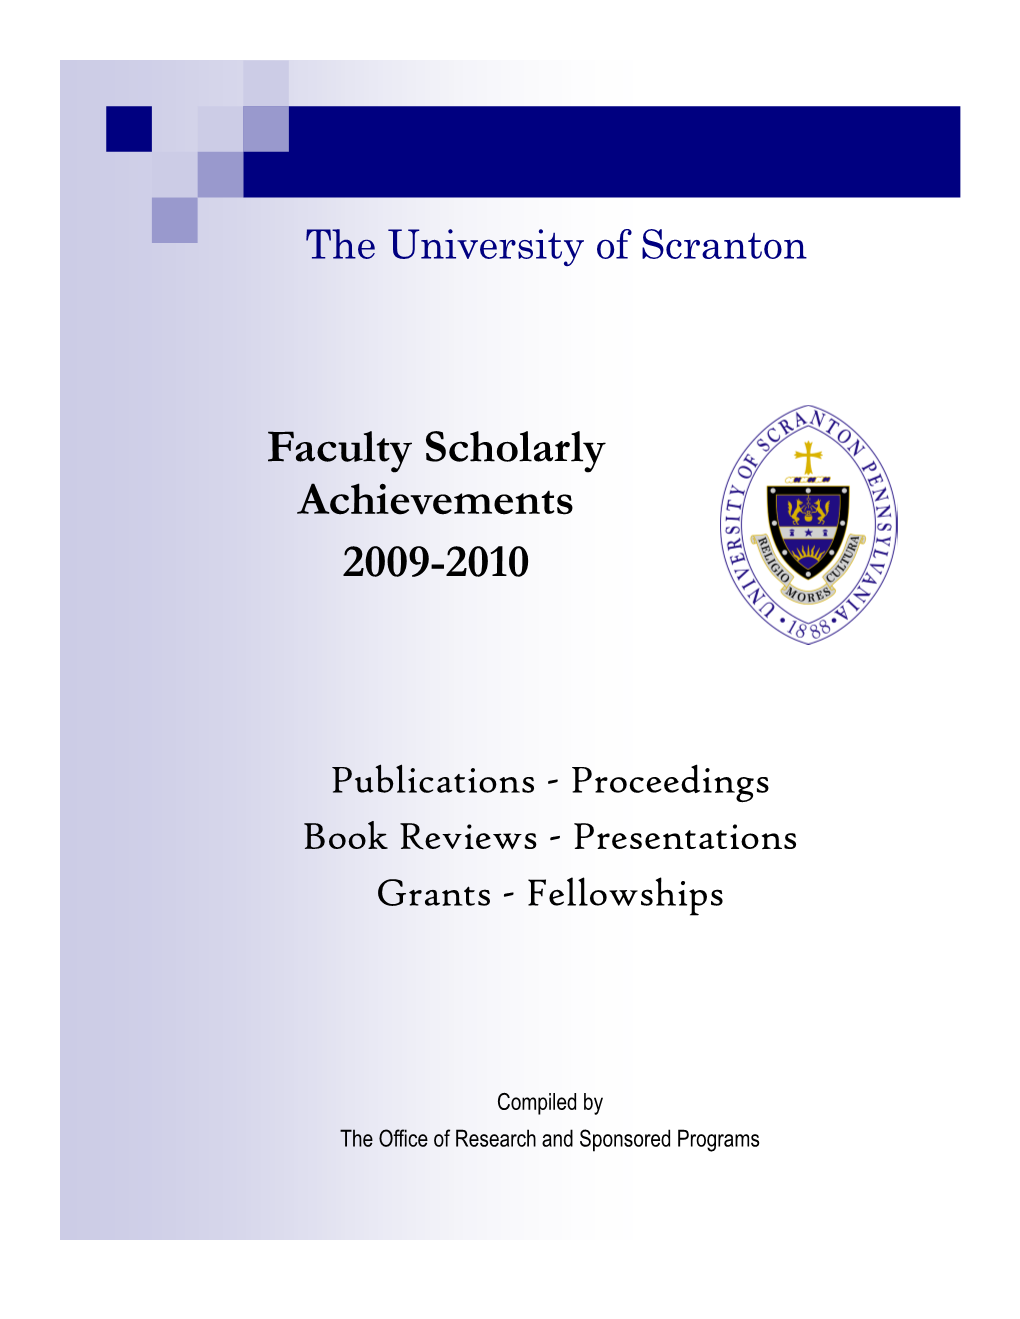 Faculty Scholarly Achievements 2009-2010